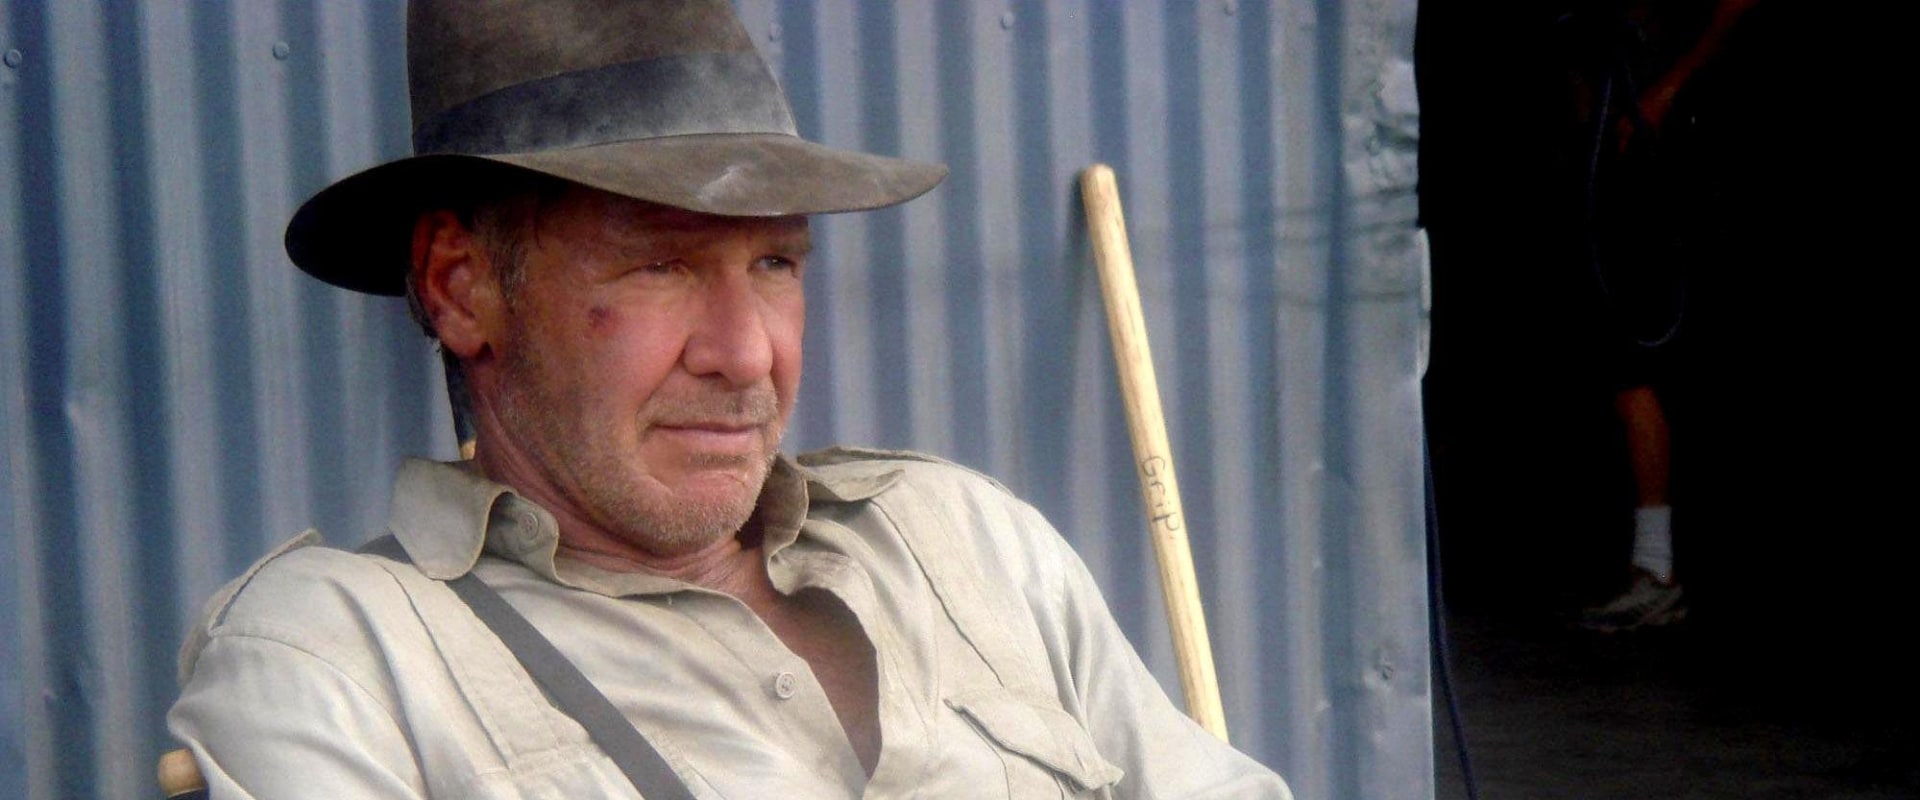 Did harrison ford do all stunts in indiana jones?